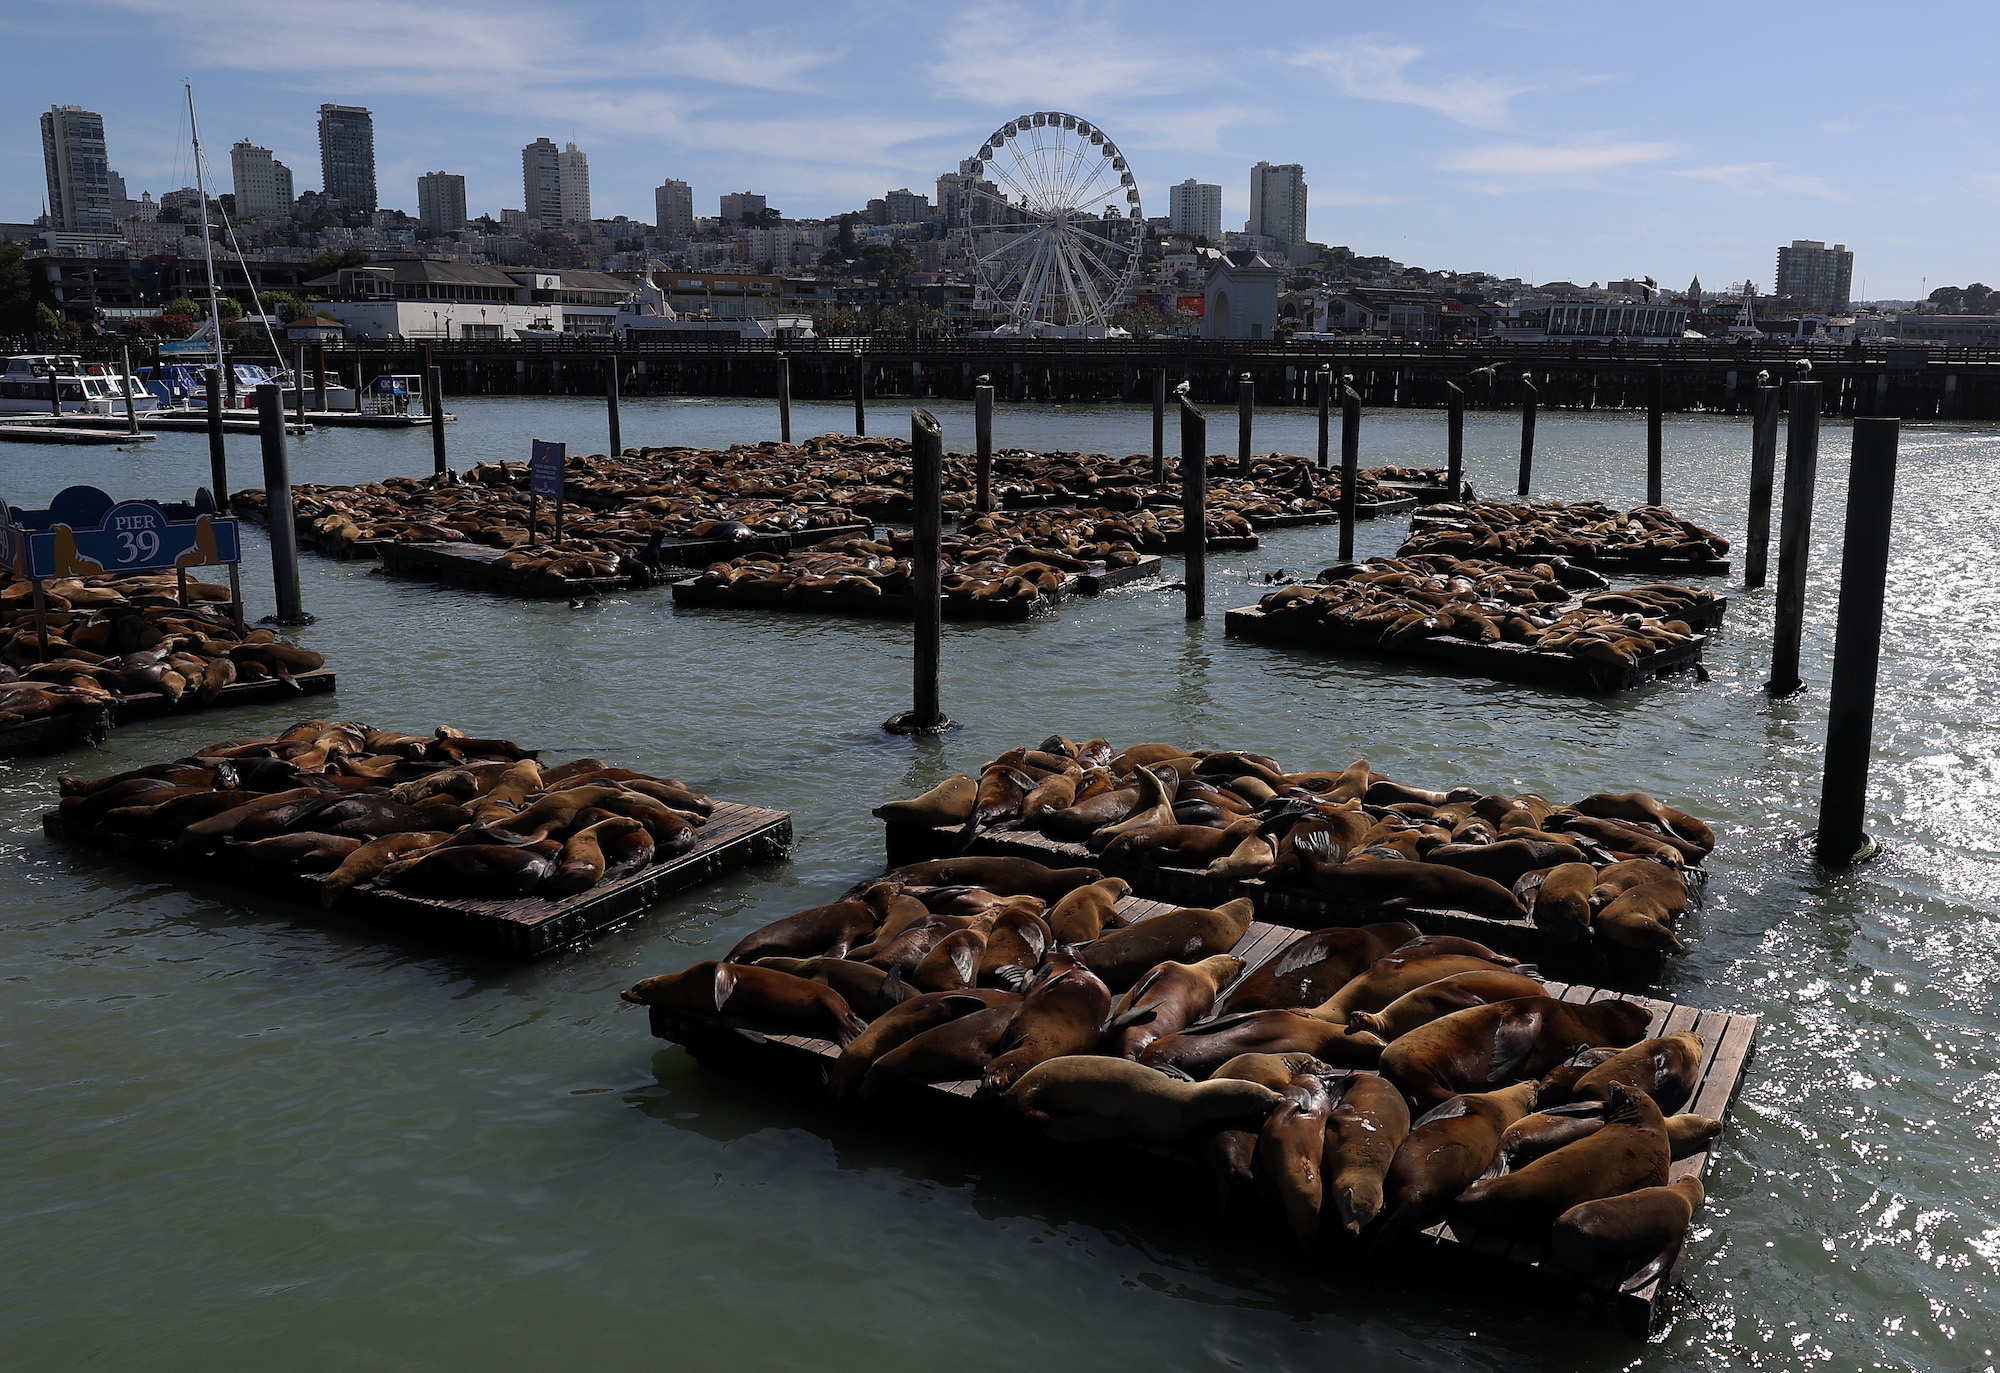 docks covered in sea lions in front of amusement part